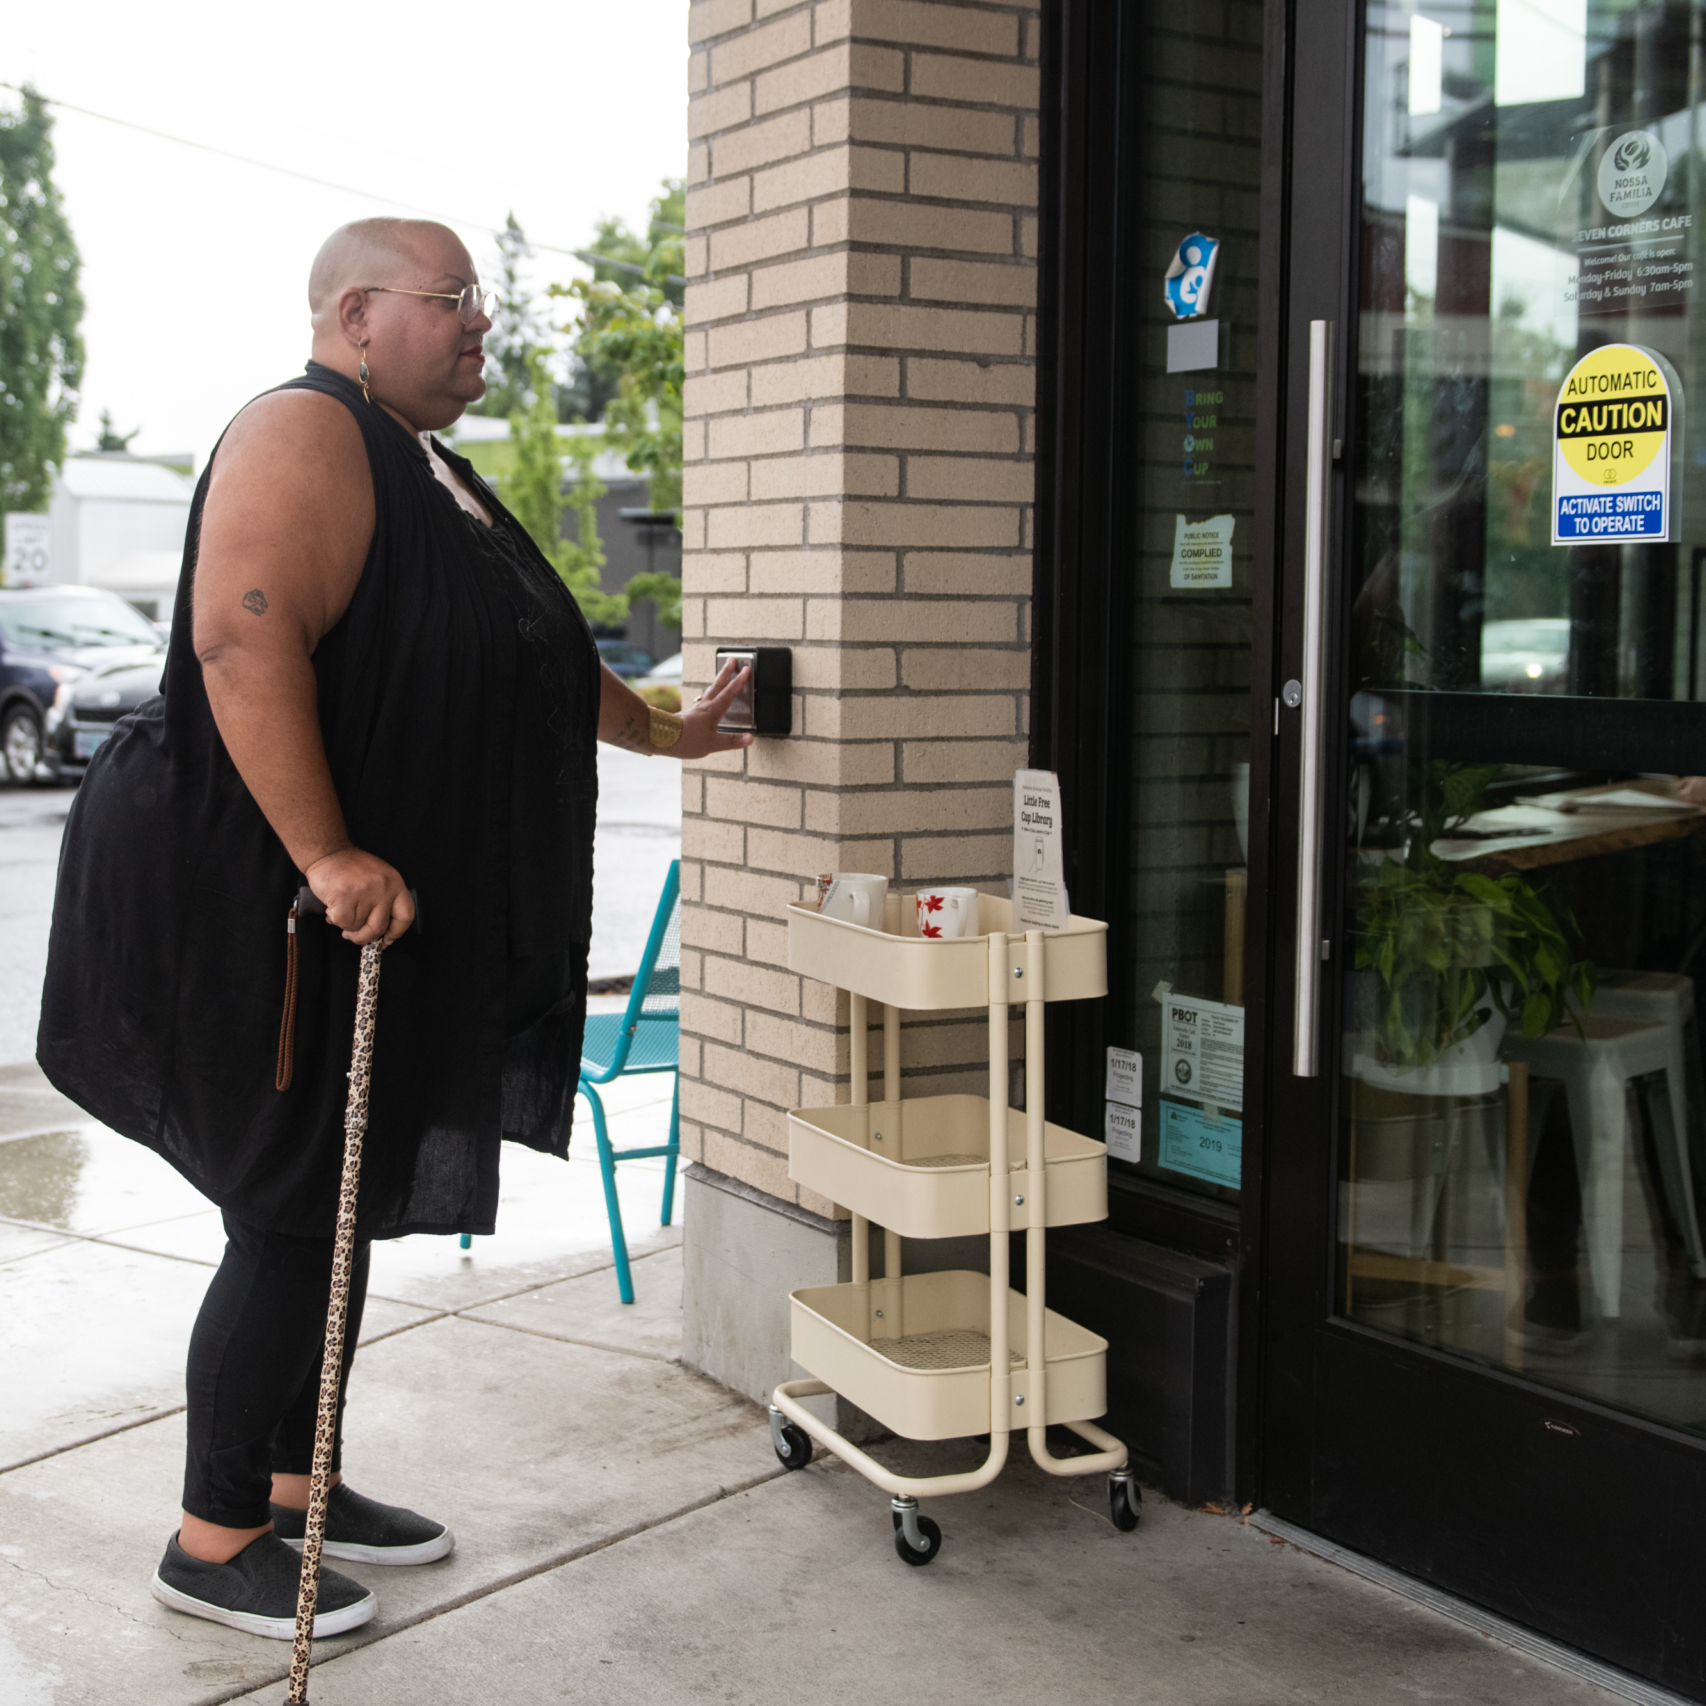 A Black non-binary person with a leopard print cane presses a wall-mounted push button to open the cafe door. They are dressed in all black and have a shaved head, glasses, and a red lip on.